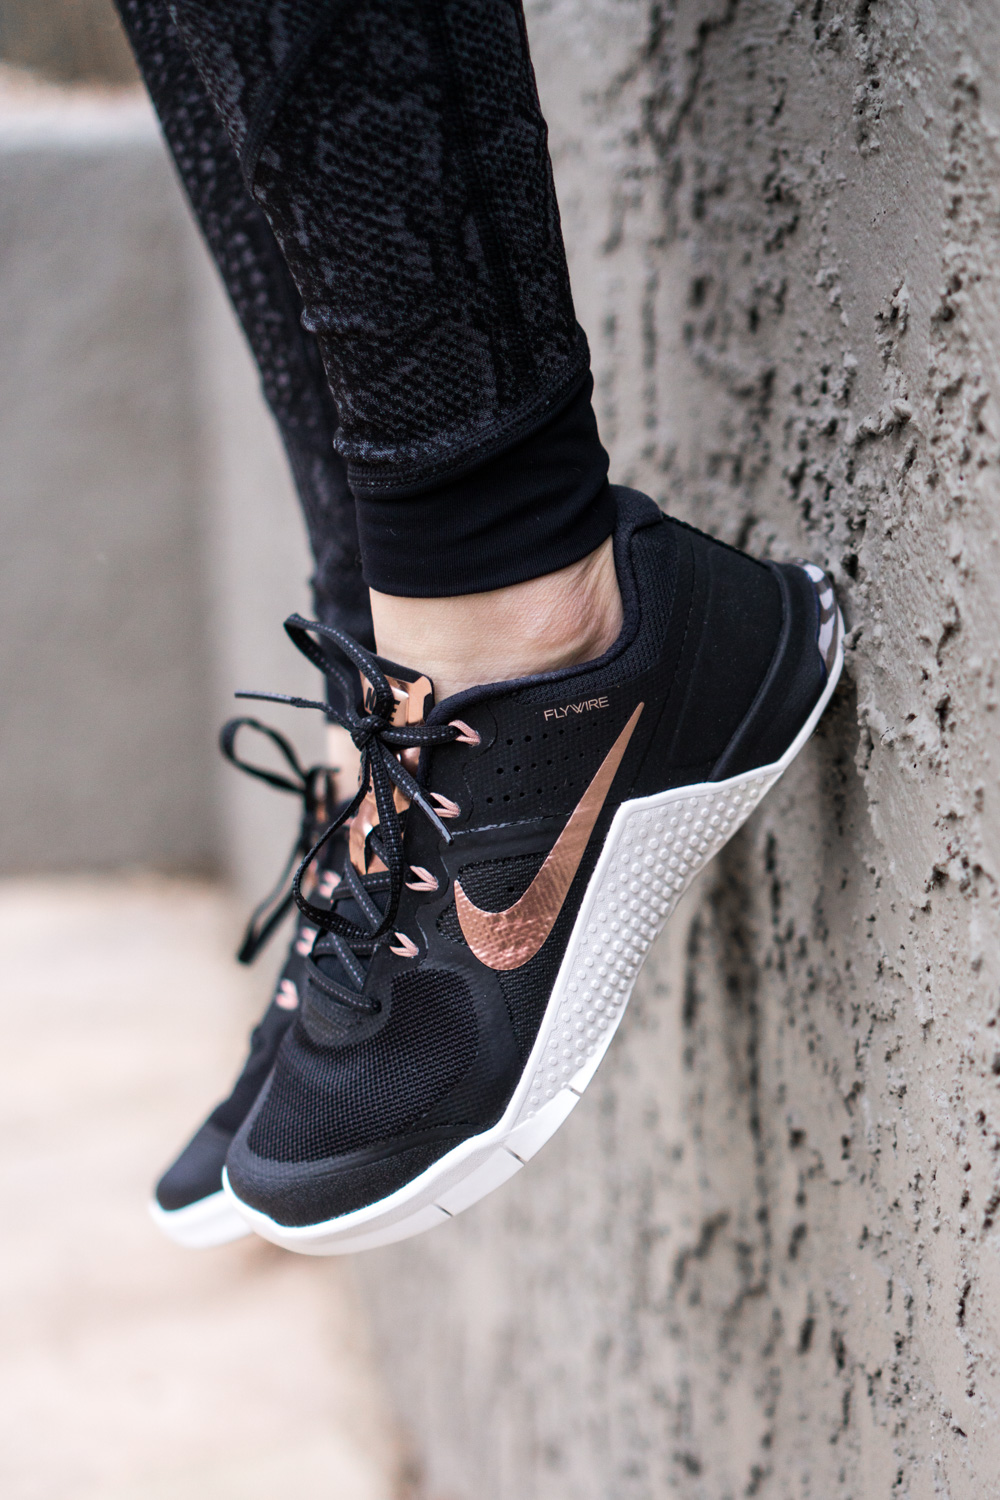 nike black shoes with rose gold